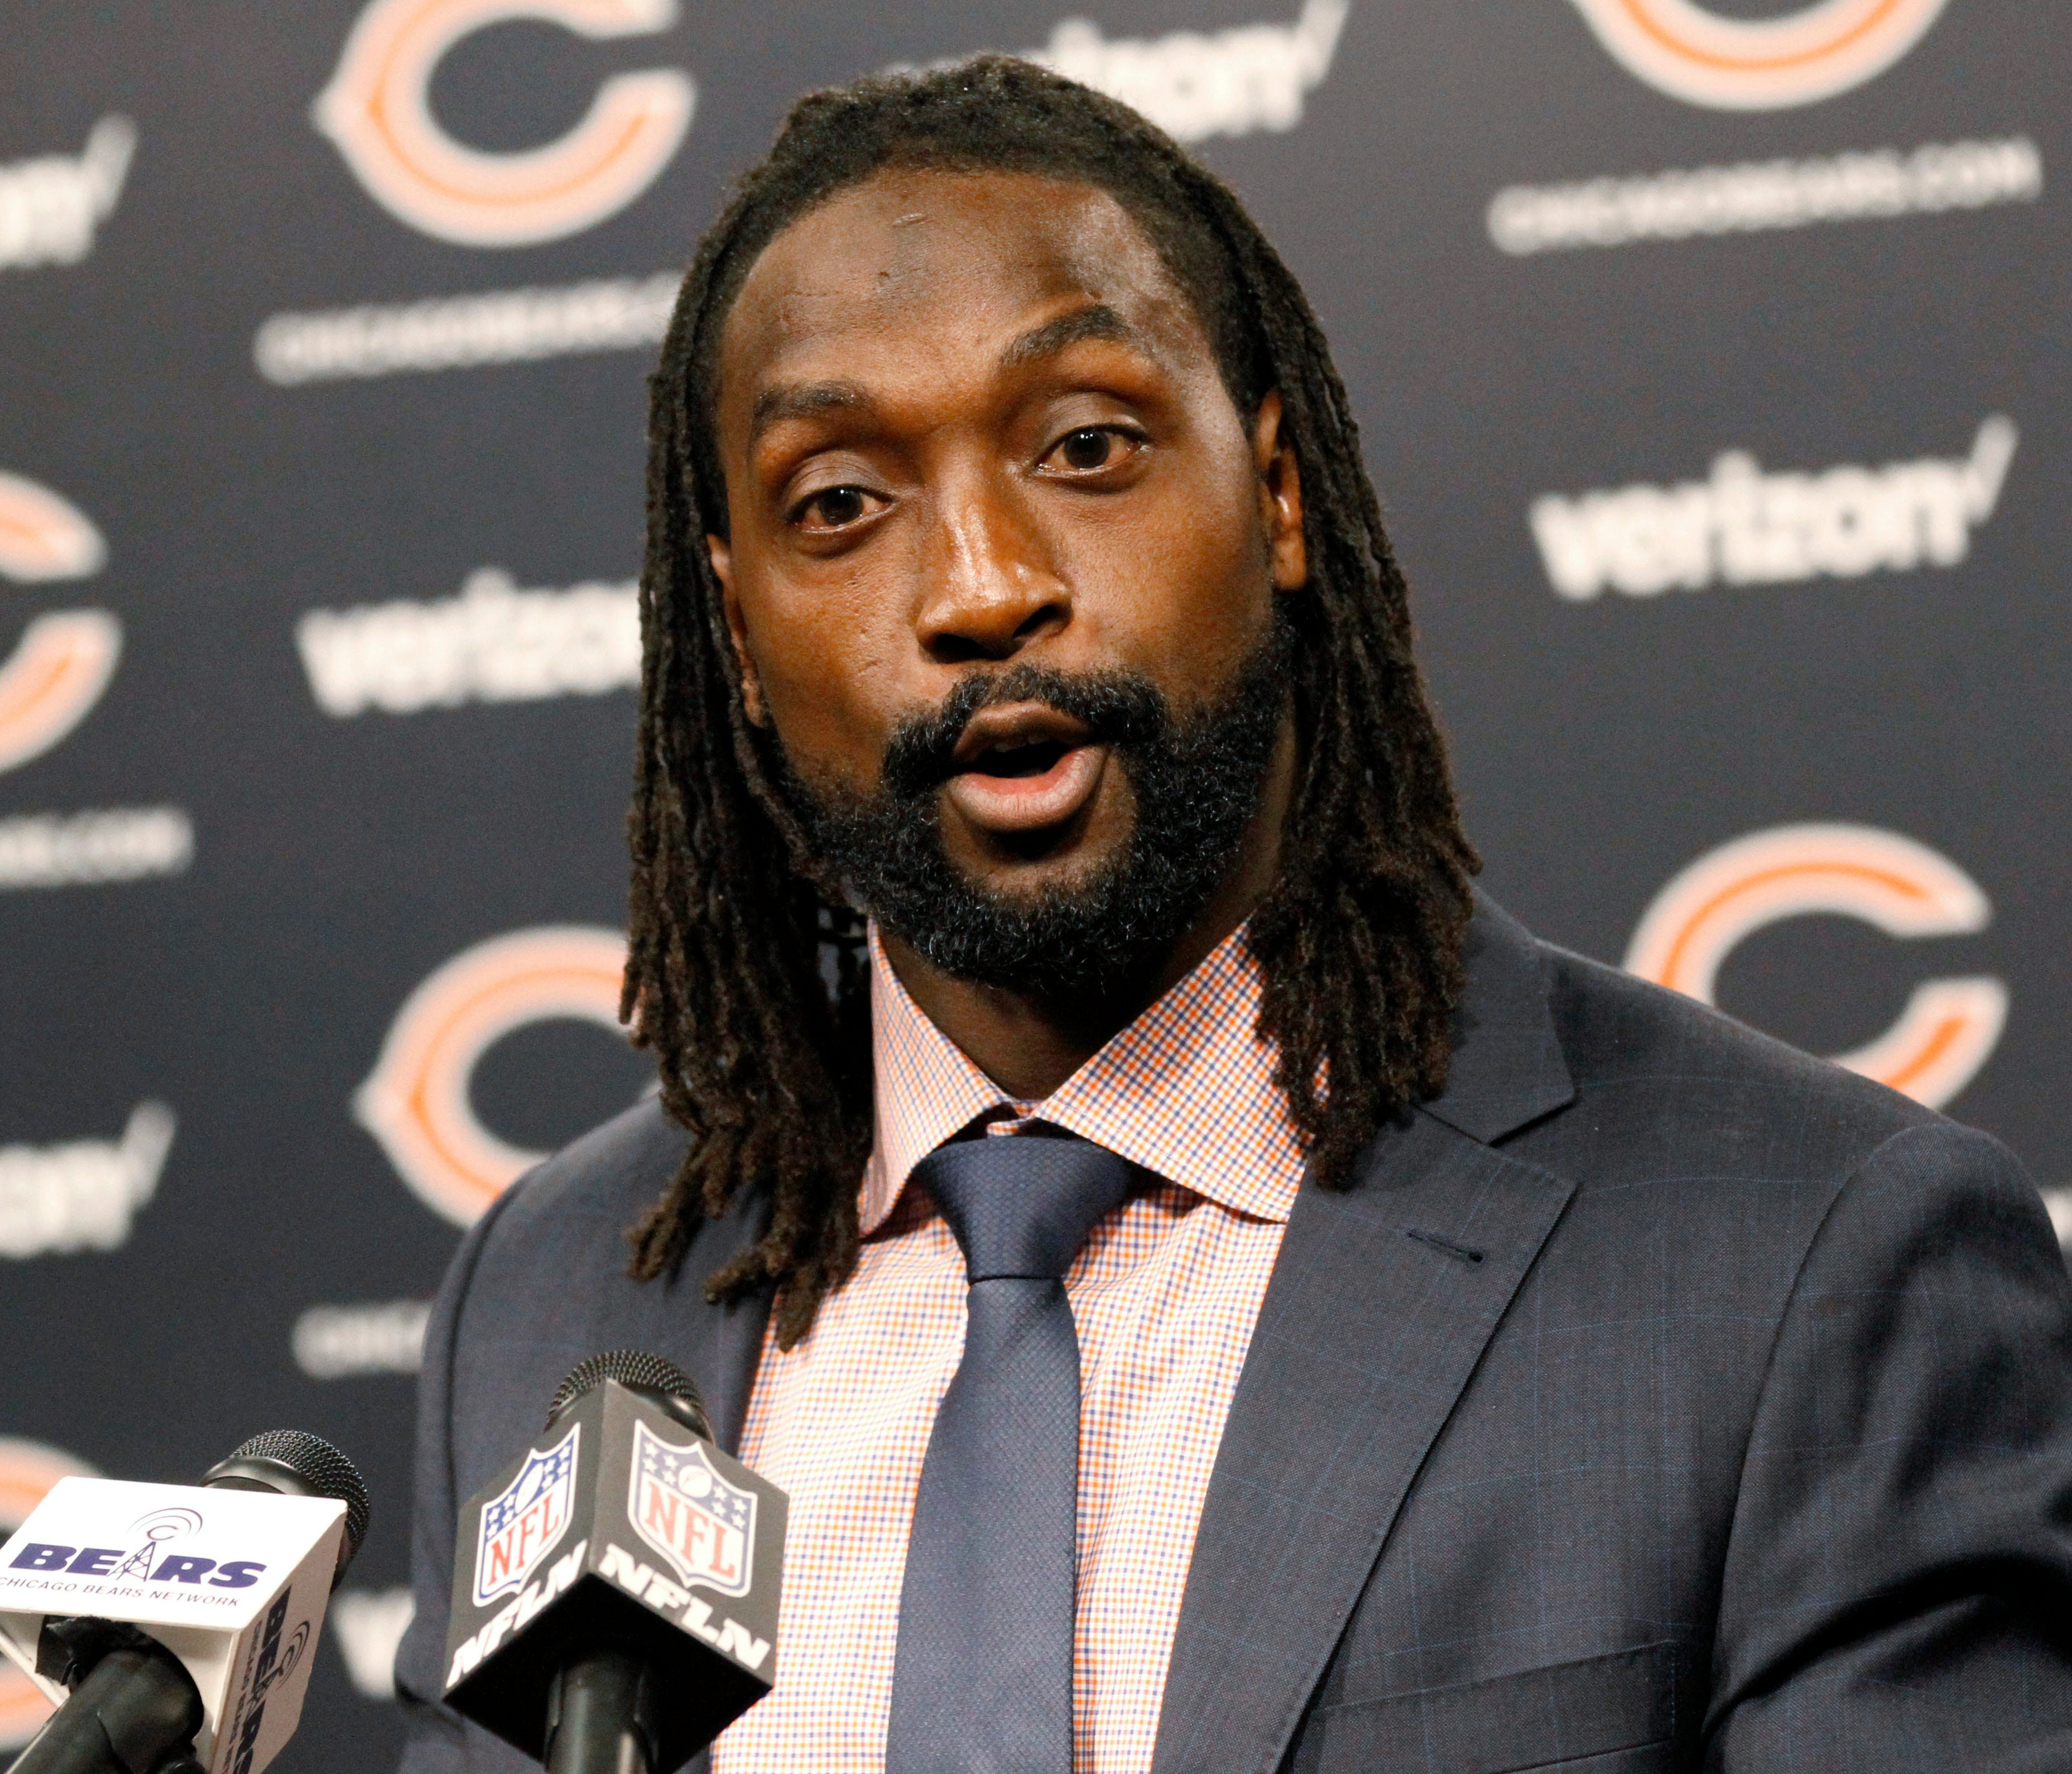 Charles Tillman speaks at a news conference at Halas Hall in Lake Forest, Ill., Friday, July 22, 2016, after signing a one-day contract with the Chicago Bears so he can officially retire as a member of the team that drafted him in 2003. Tillman spent